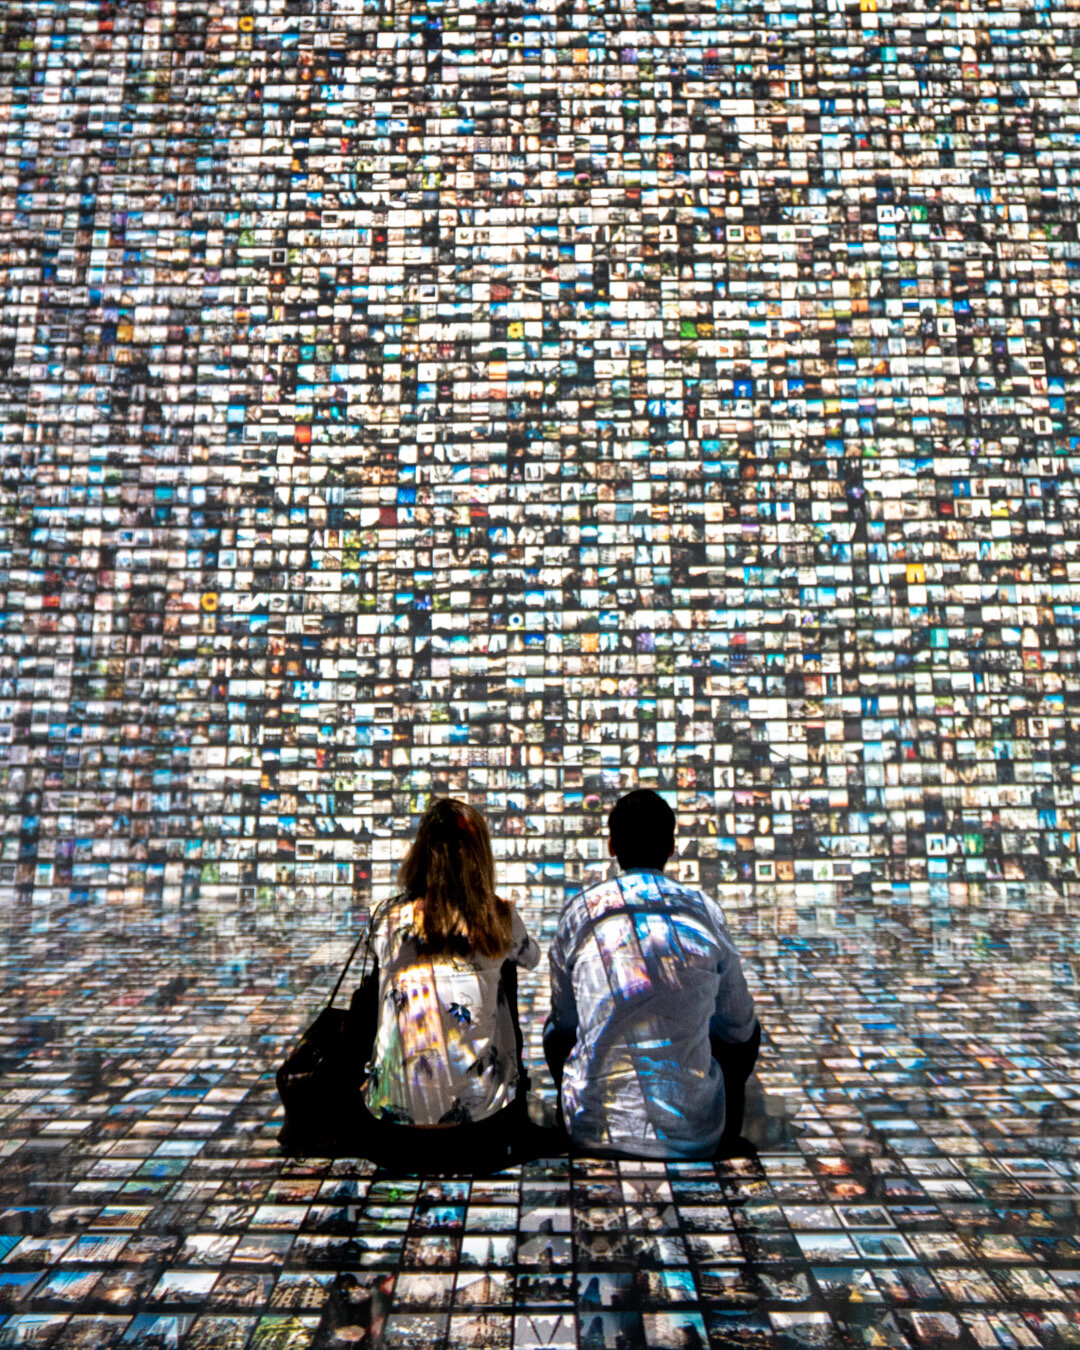 Couple sitting on ground with images projected on wall